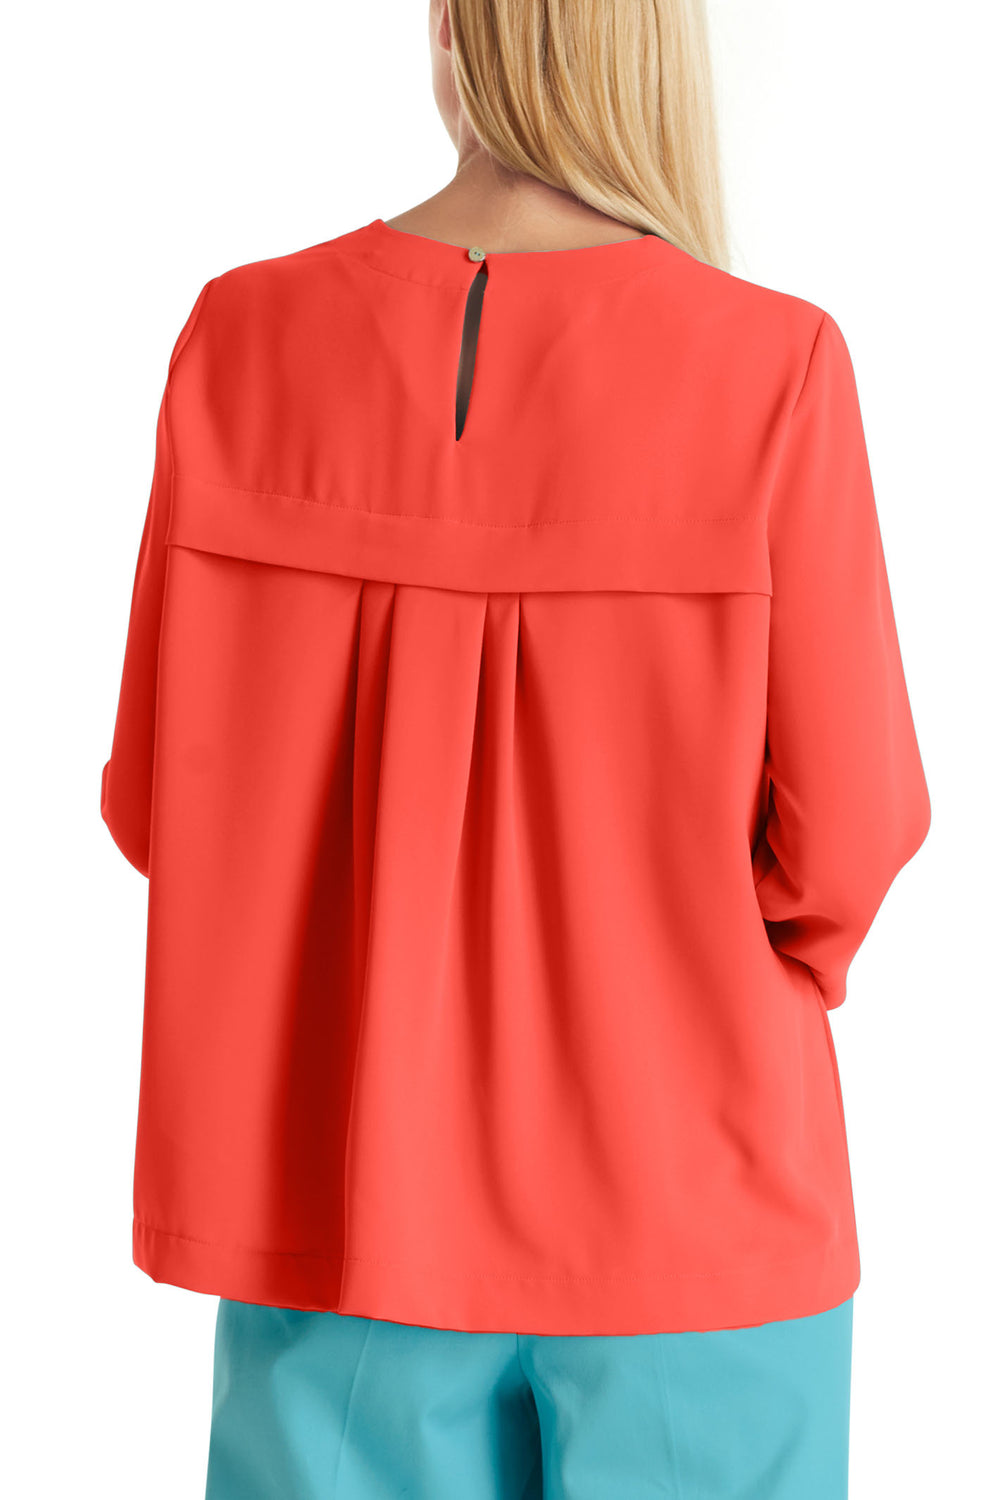 Marc Cain Collection WC 51.11 W55 223 Bright Tomato Red Blouse - Olivia Grace Fashion